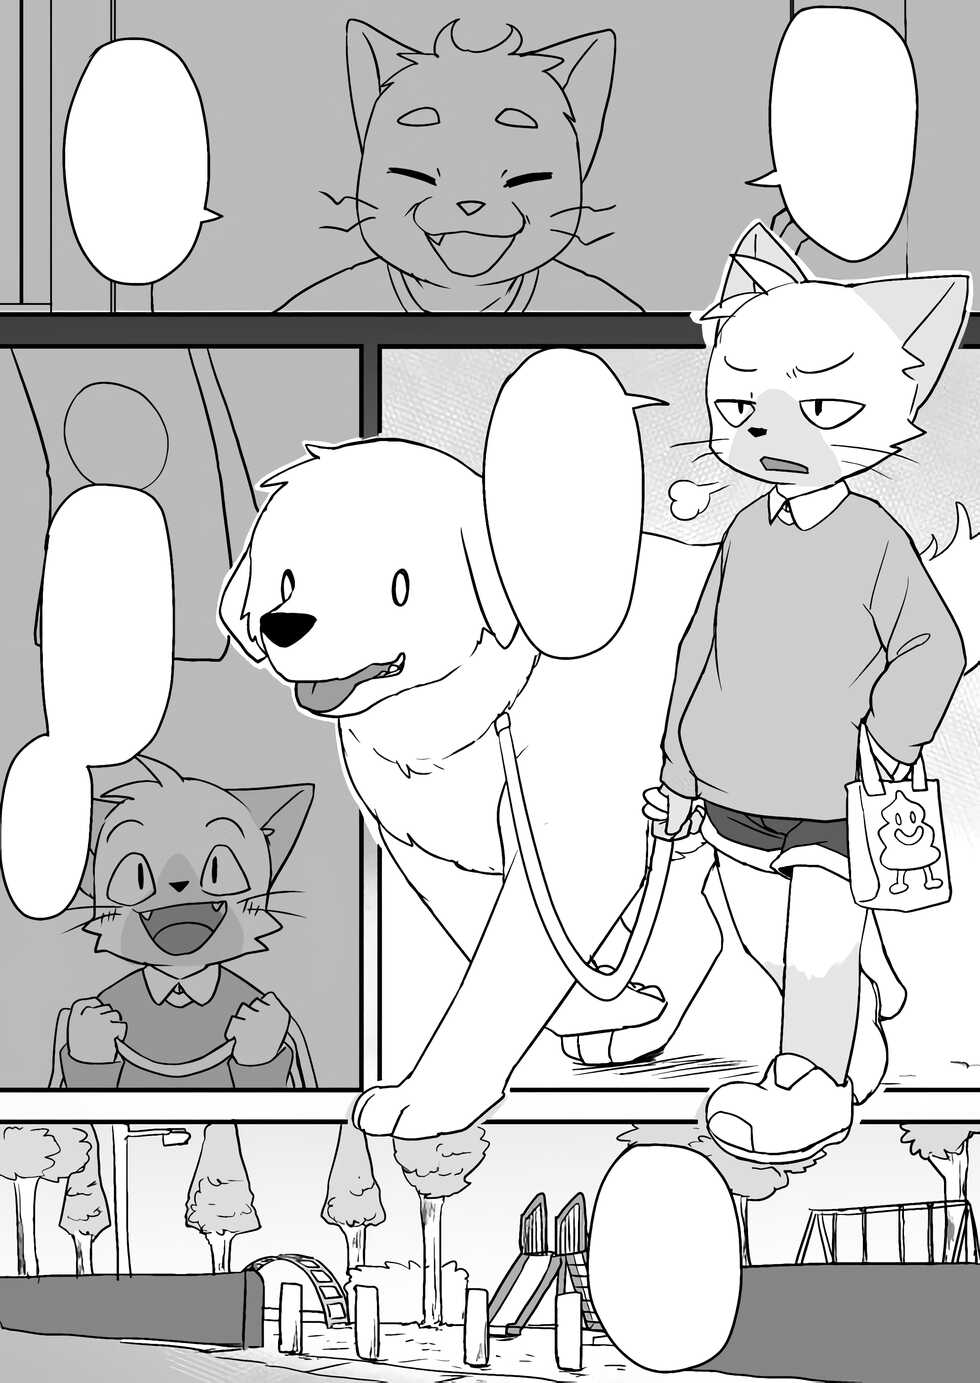 Manmosu Marimo - Walking the Cat (Unfinished) [Textless] - Page 2